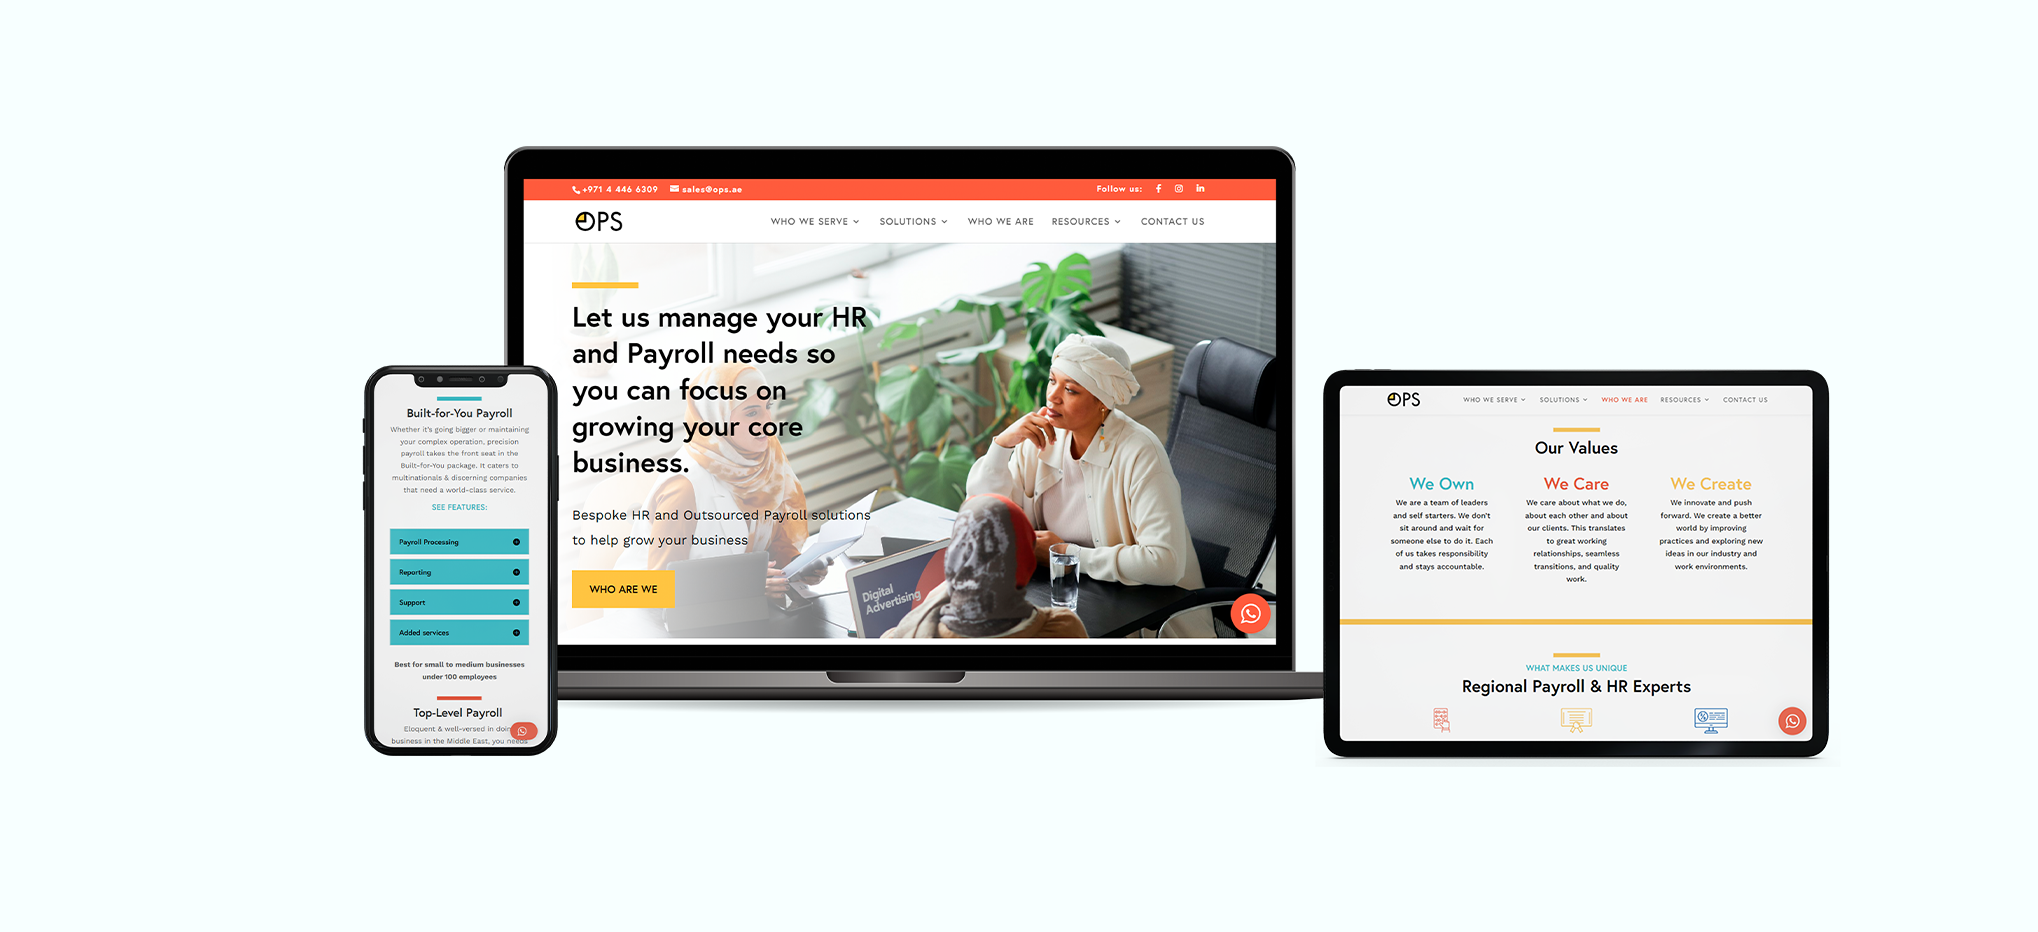 OPS Case Study Chell Web & Design